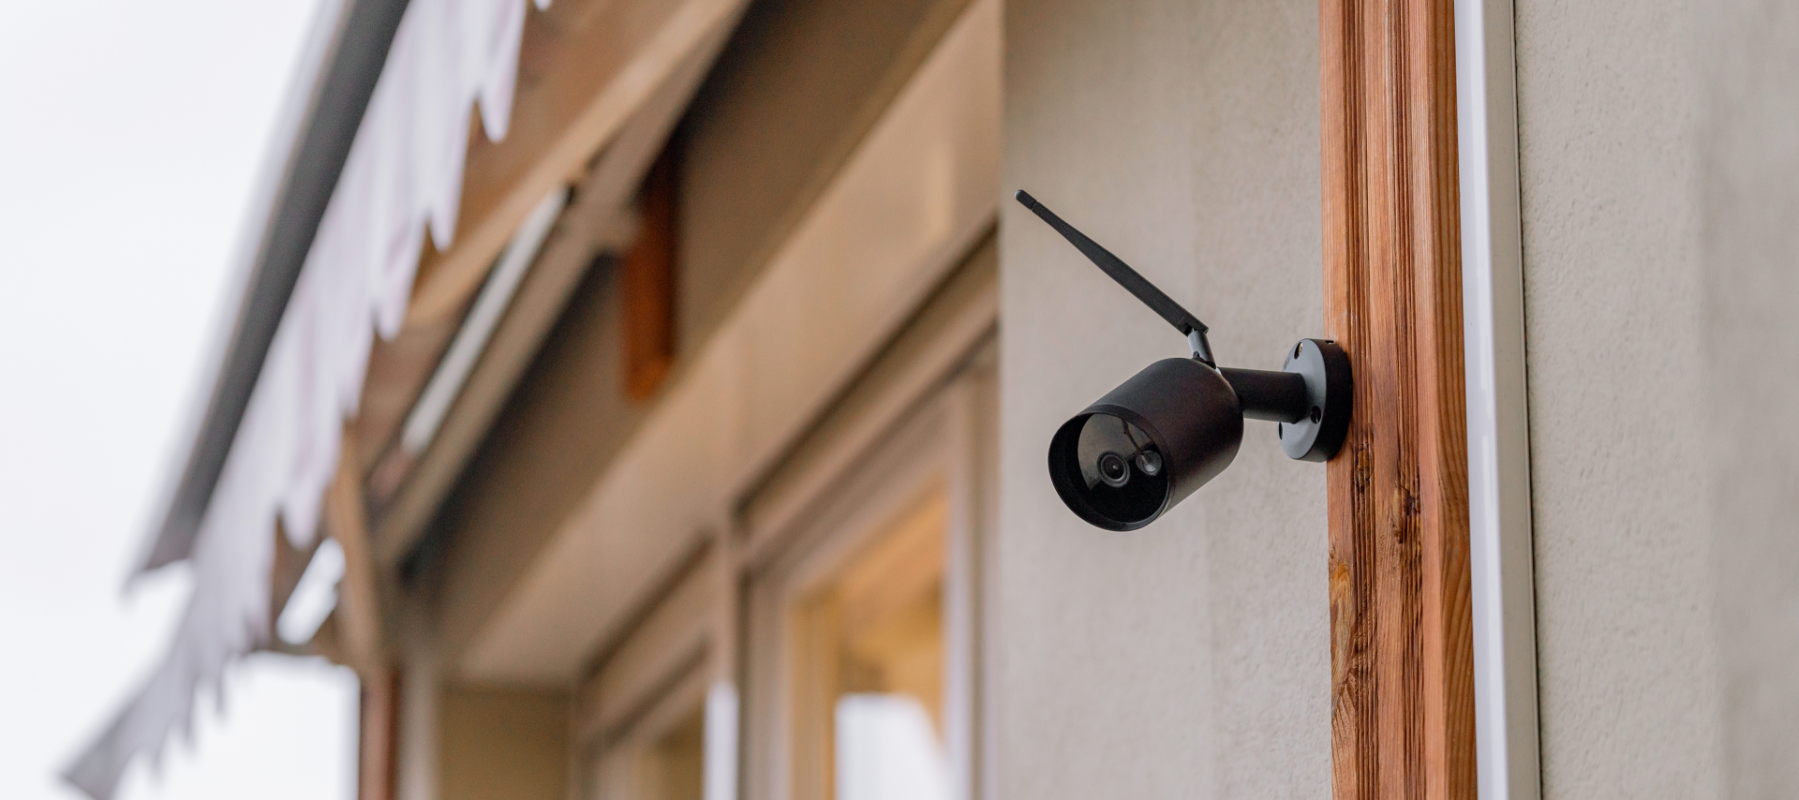 A camera that guards your house